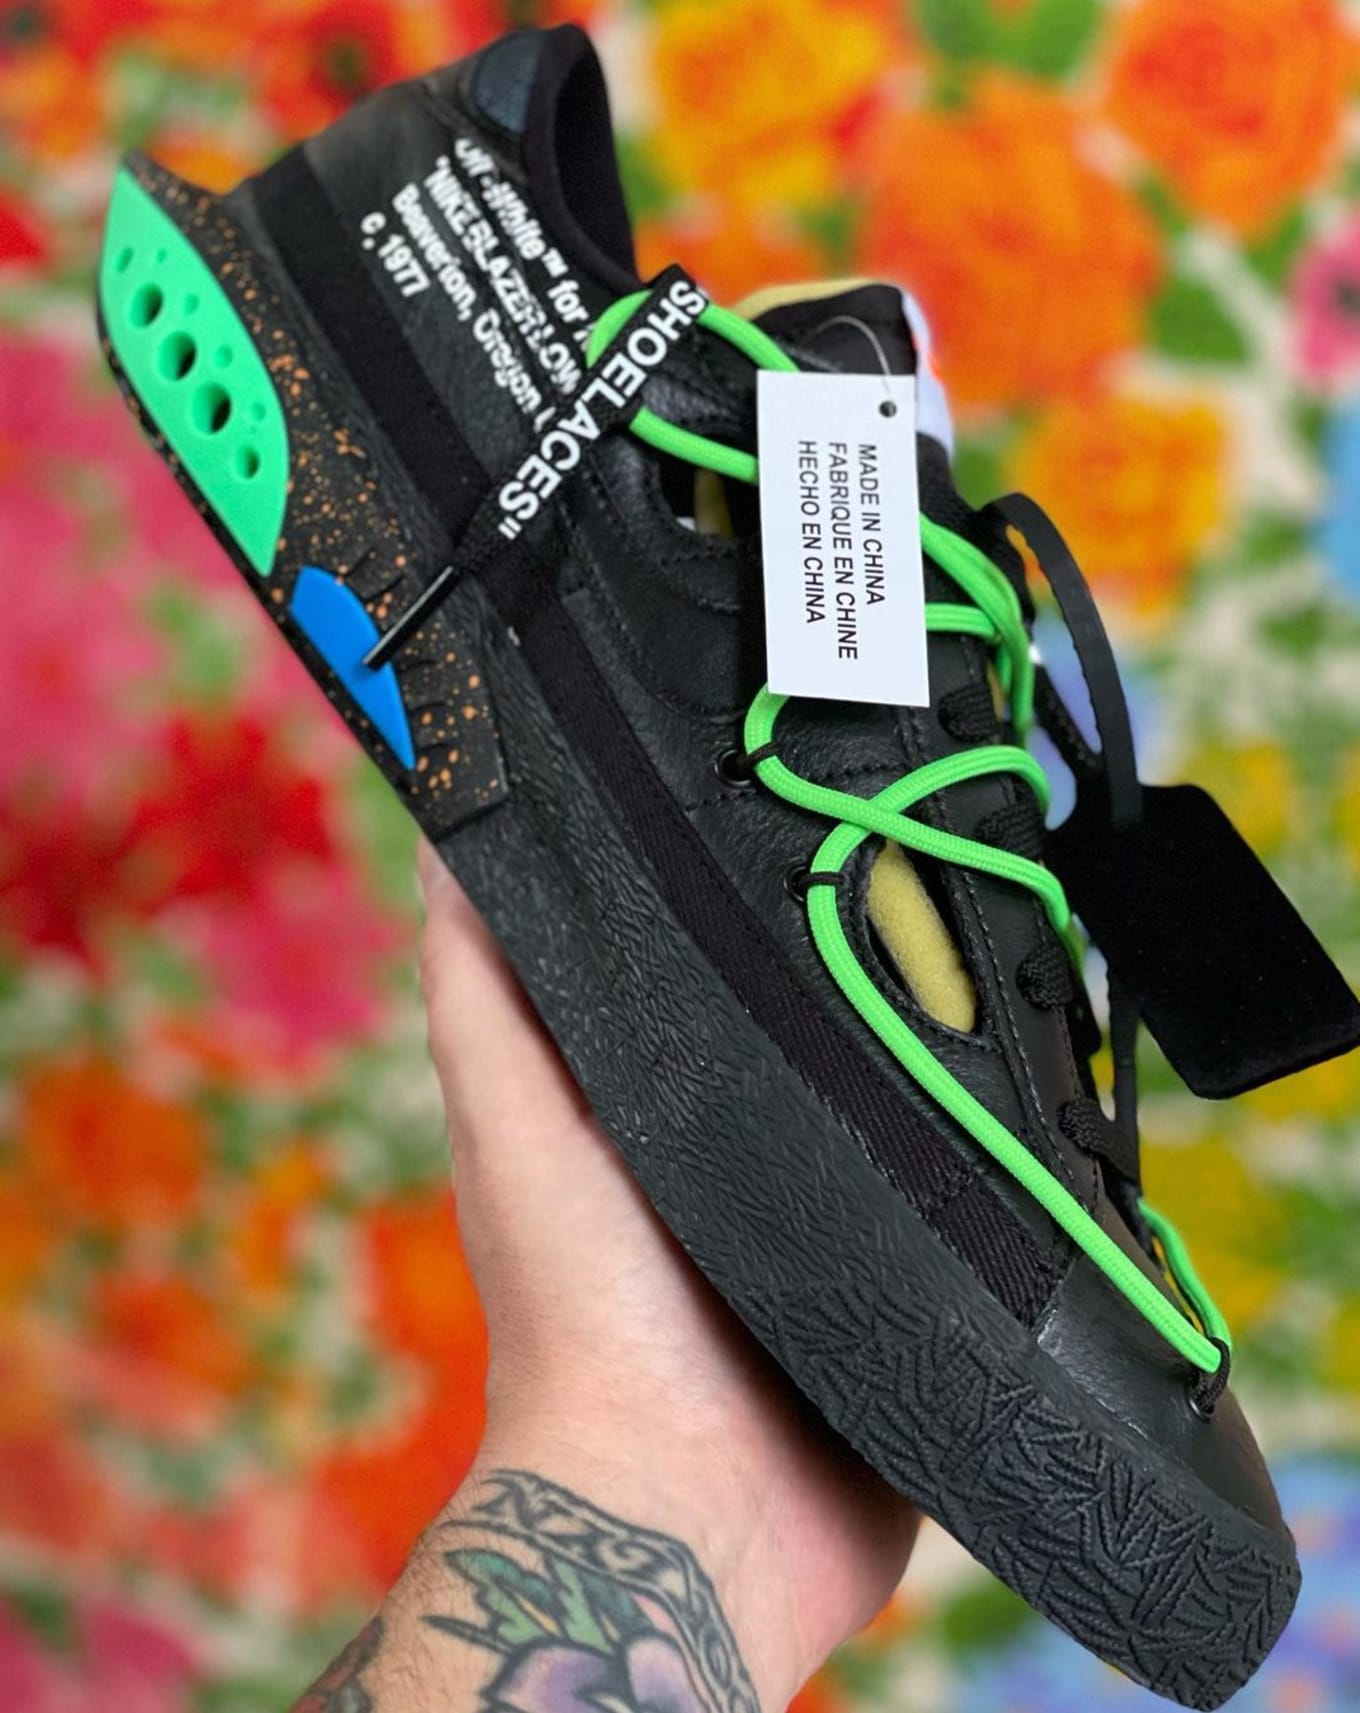 Off-White Nike Blazer Low 'Black/Green' 'White/University Red' Release | Sole Collector